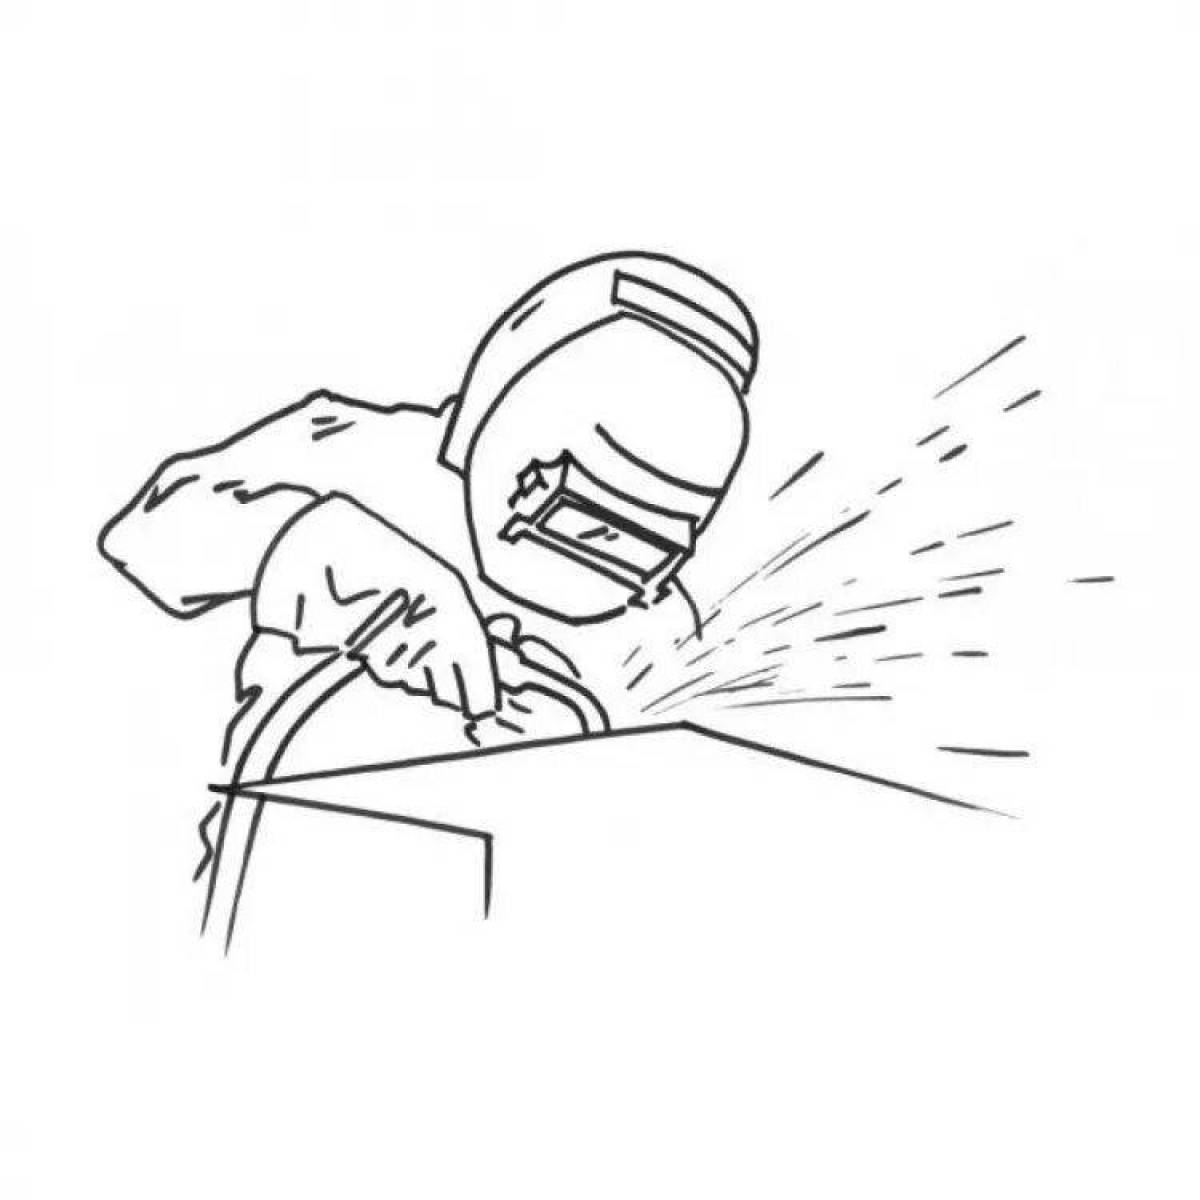 Courageous welder coloring page